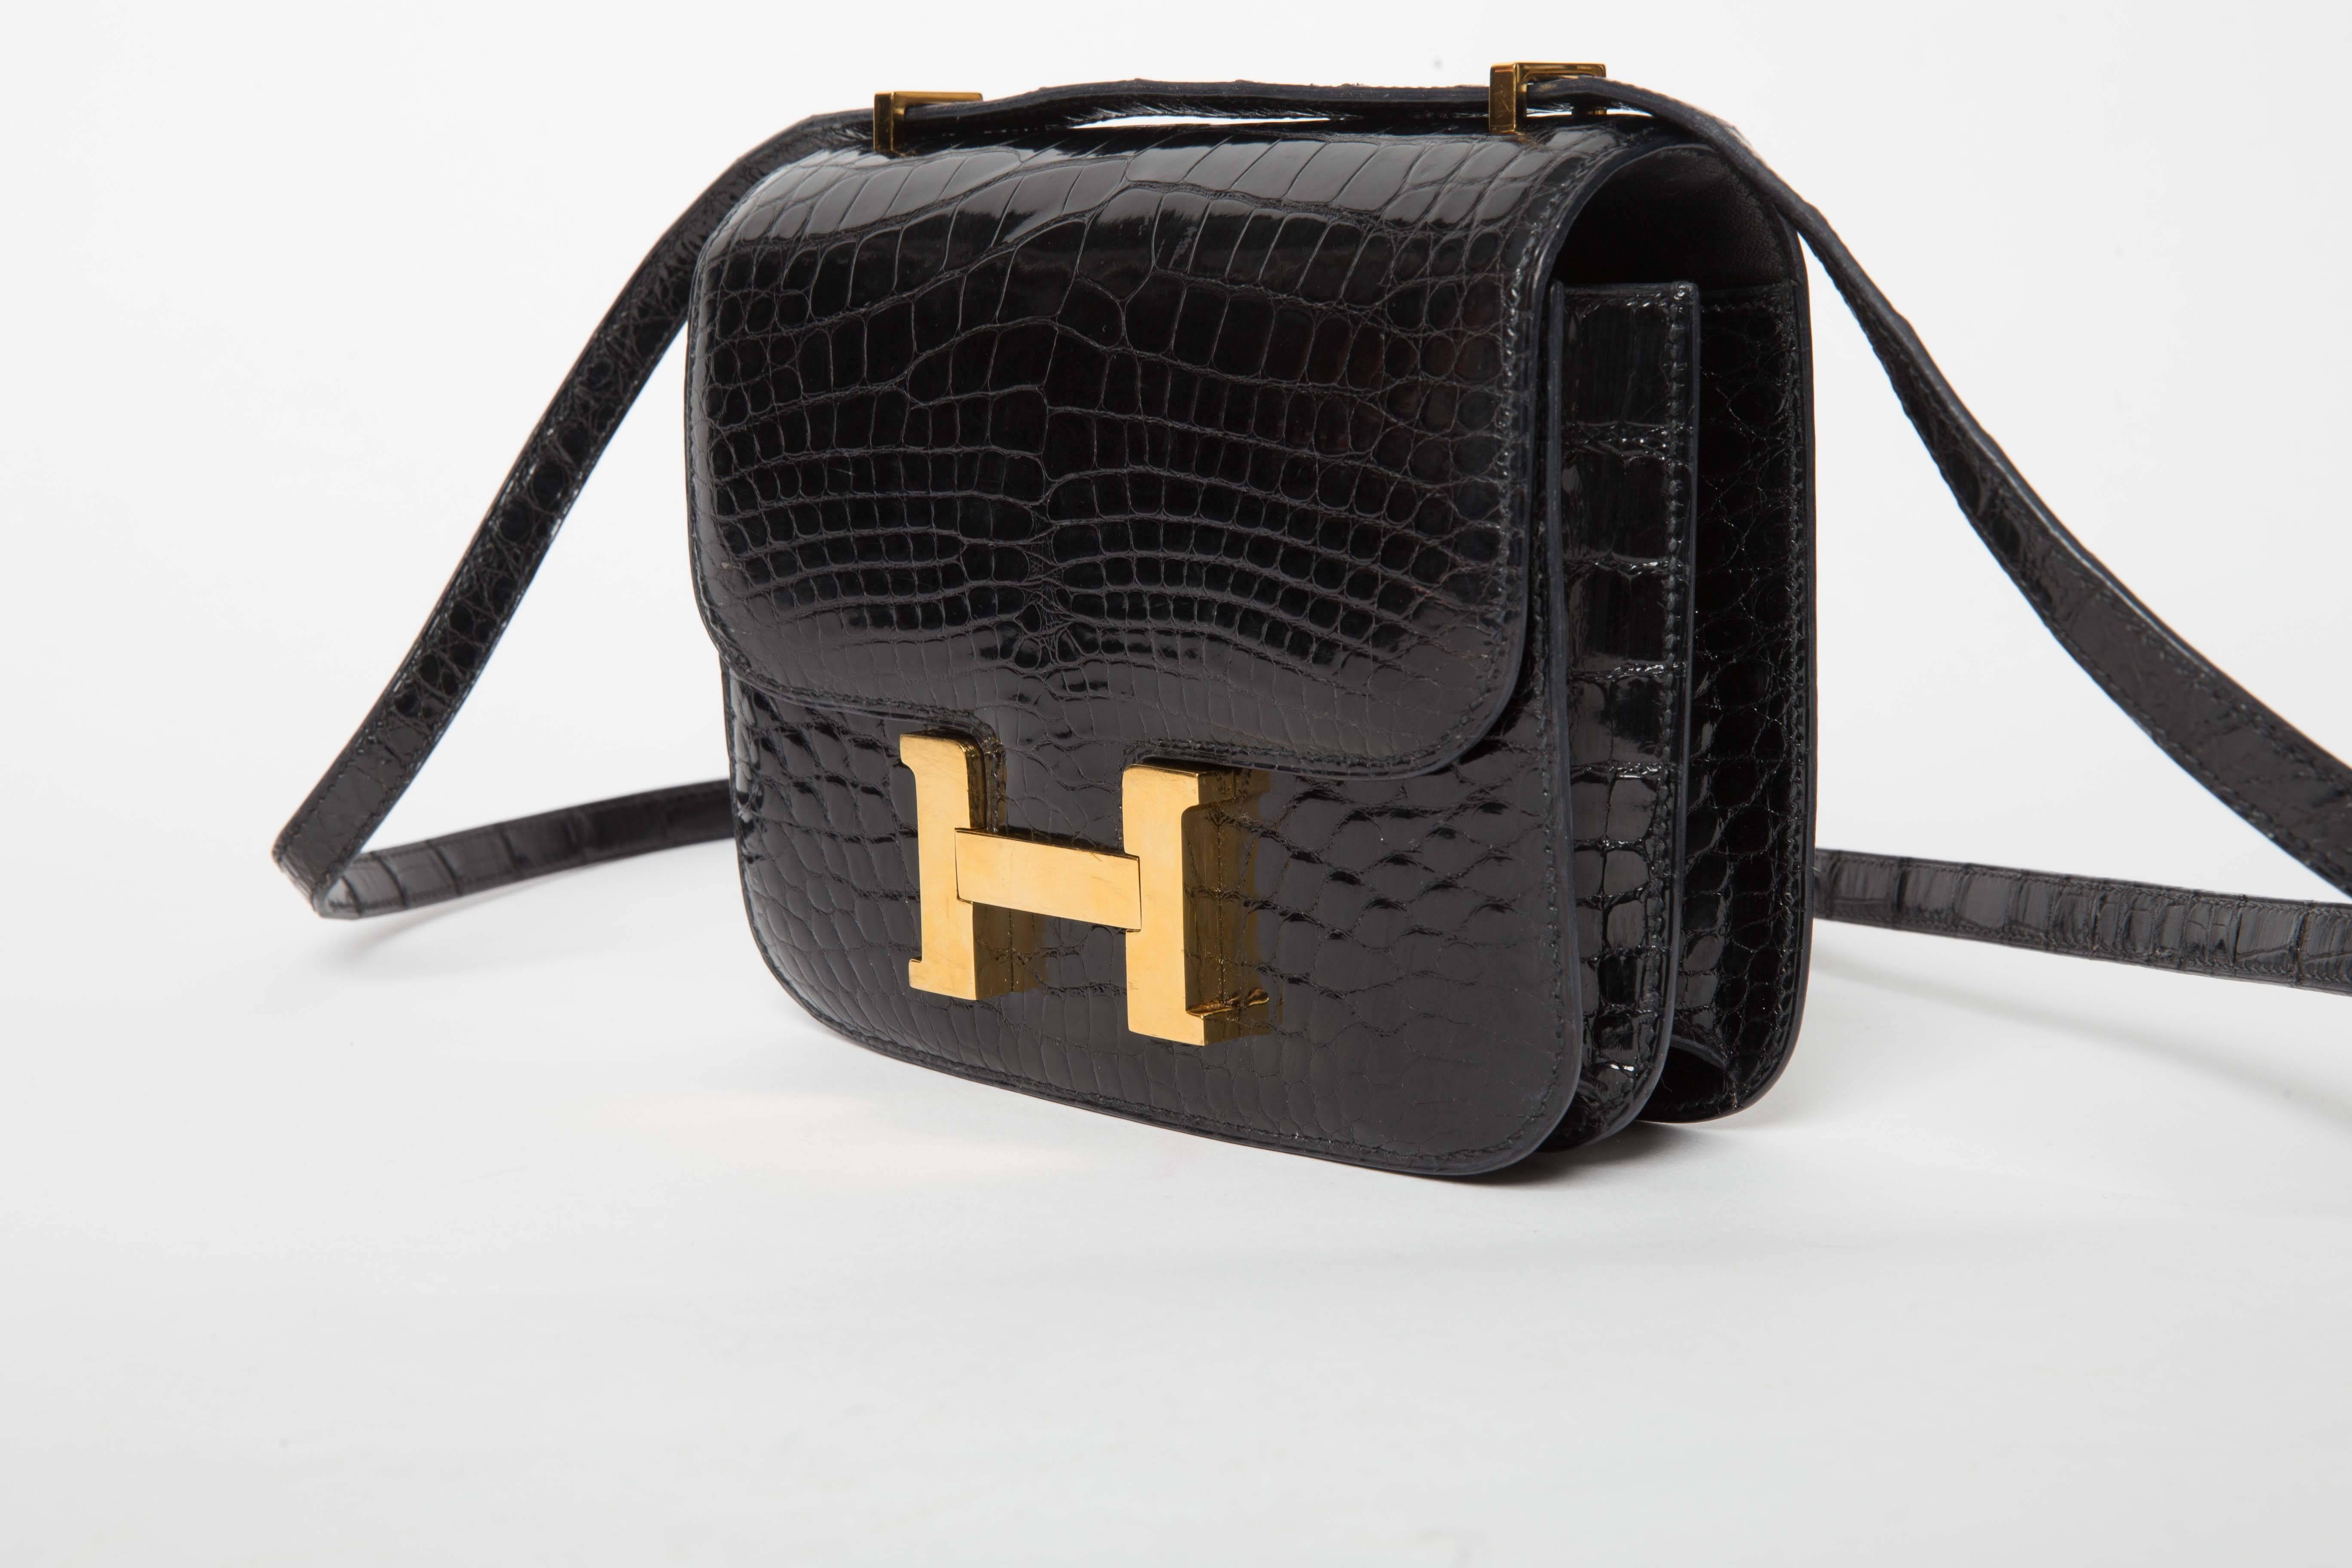 Absolutely stunning Black Baby Alligator 18 cm Hermes Constance with Gold Hardware. This iconic bag is in excellent condition. The skin is lustrous and the stitching is perfectly intact. There are scratches to the hardware consistent with age. This 